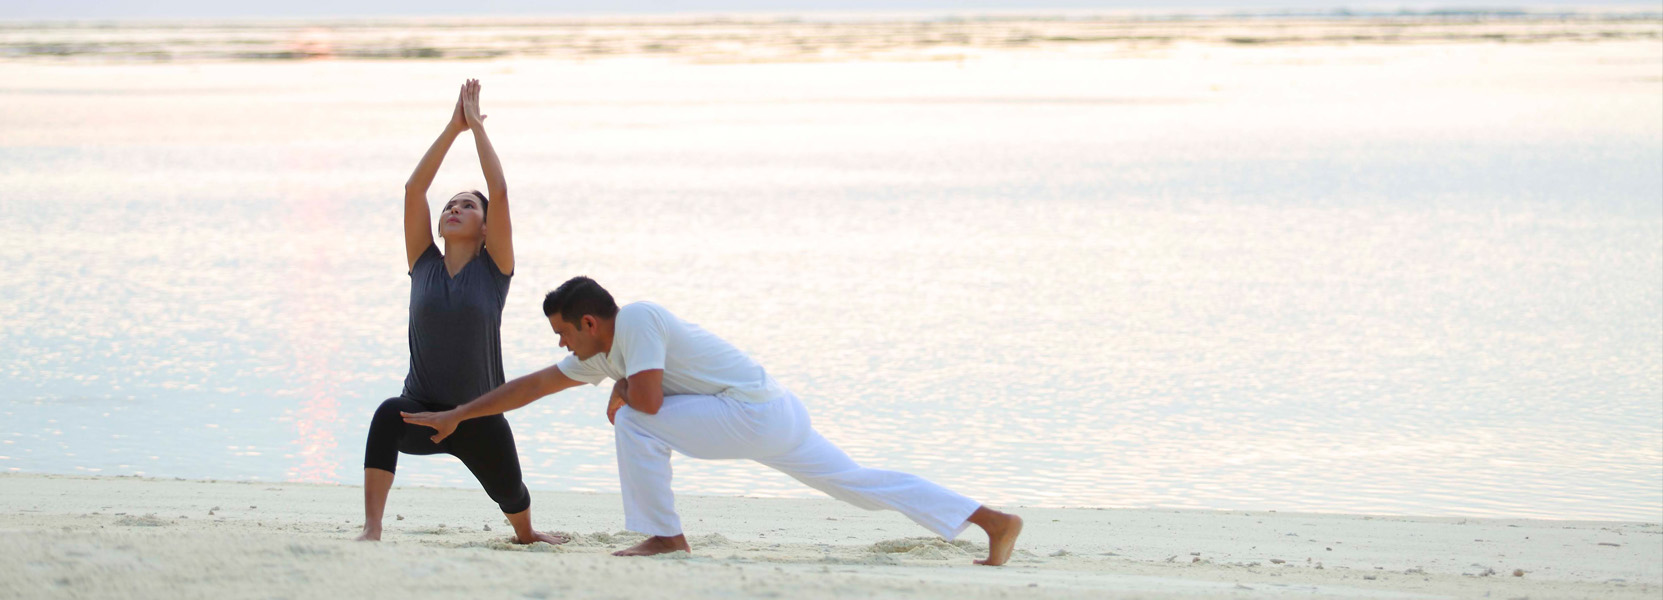 At Gili Lankanfushi in the Maldives, guests can now align their chakras castaway-style with a series of yoga and meditation sessions on the beach.